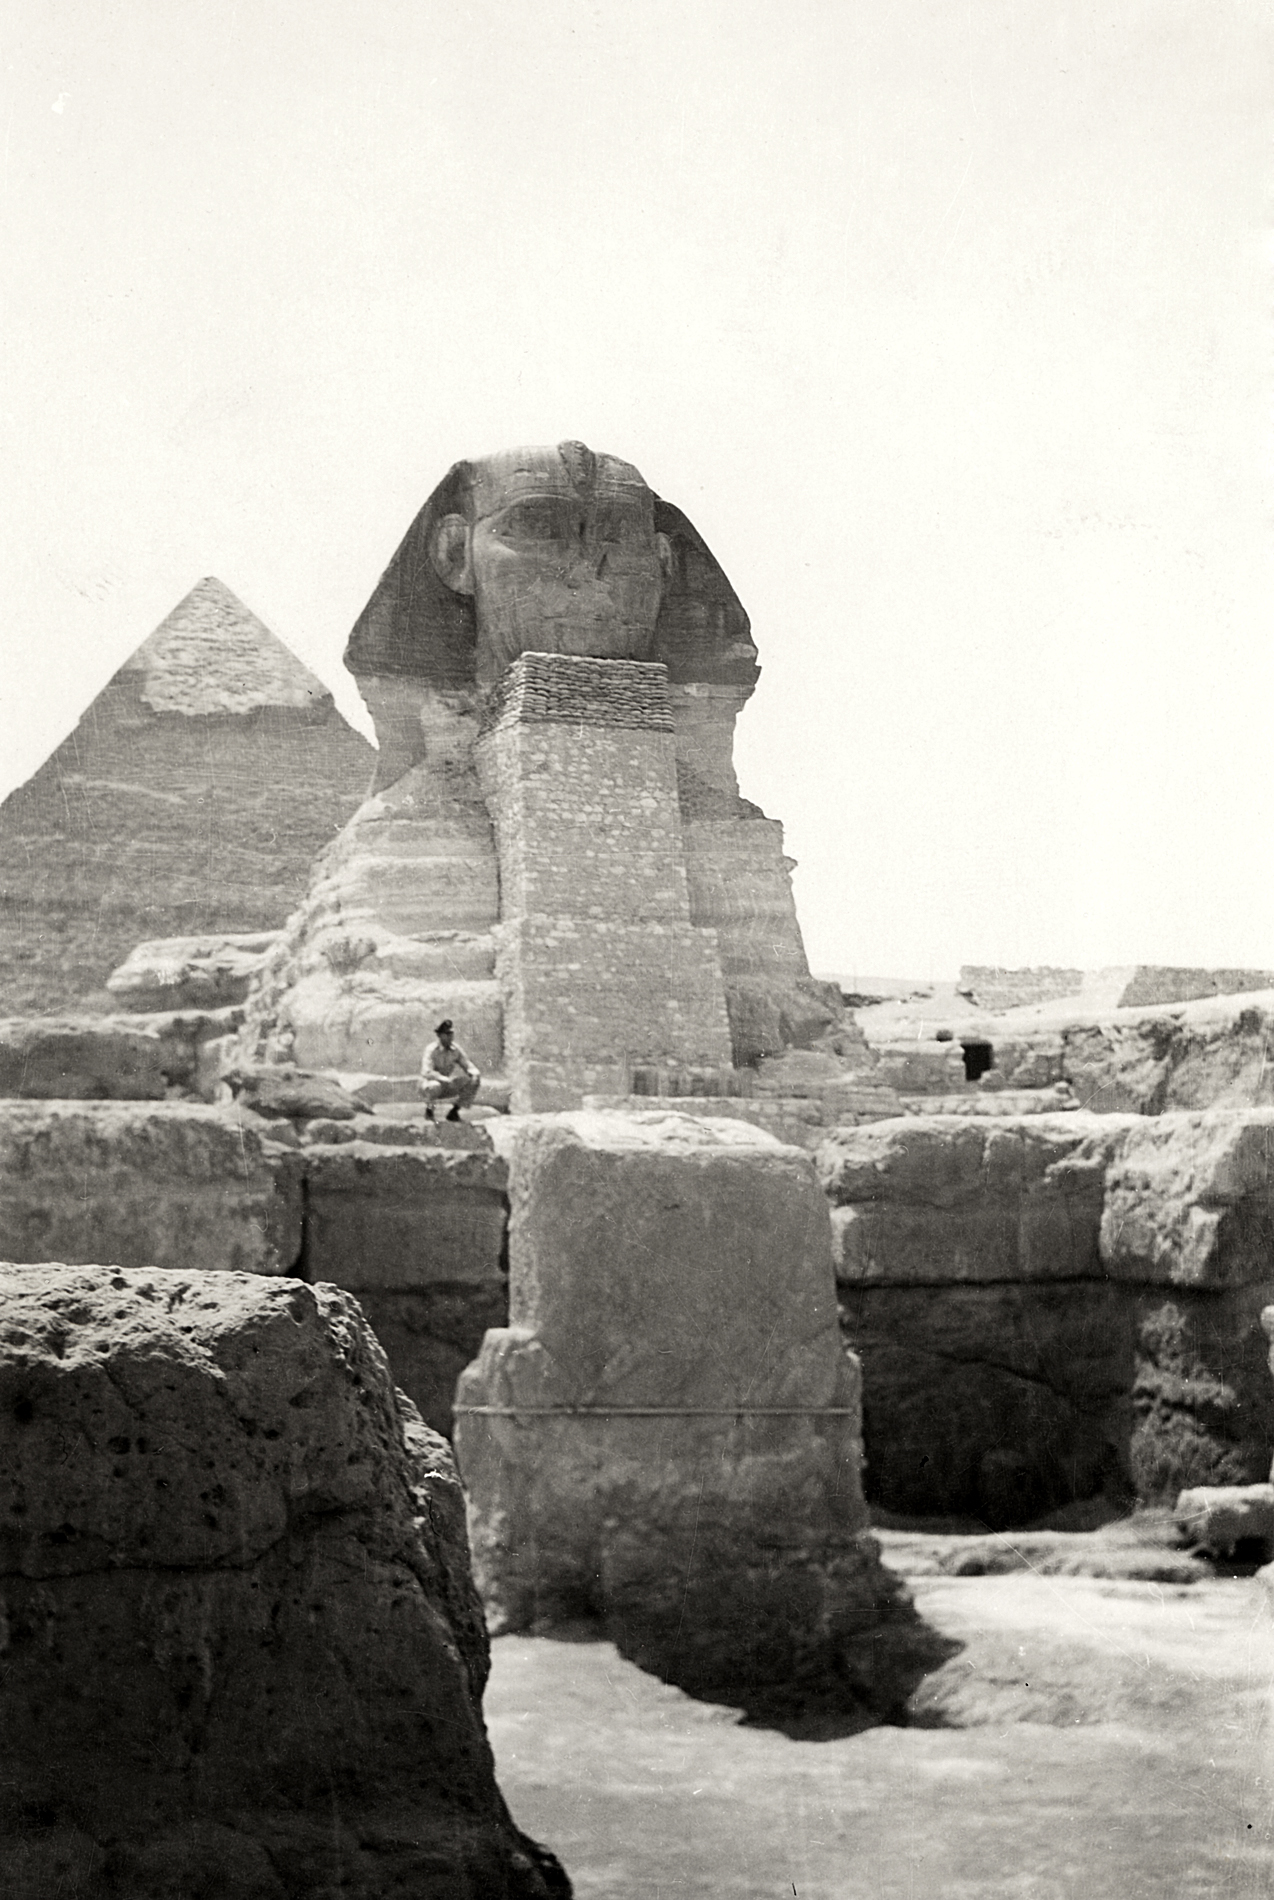 Here's my grandfather at the Sphinx in May 1945, plus or minus a month or so. I've recently run across a stash of his photos and am slowly working my way through scanning them. Sadly, he wasn't much for labeling his photos unless these have fallen out of an album I haven't uncovered yet, so beyond some of the more obvious landmarks, it's difficult to impossible place the photo in time and space. 

This one's easy though. As a C-47 pilot (https://www.shorpy.com/node/4003) based in Naples at this point, he made several trips to various North African destinations, apparently with enough time to take in the sights now and again. His photographer is never identified, but seems to put a little more thought into the composition than your average snapshot-taker. 

I showed this photo to my wife. "Where _is_ he?" she exclaimed. I want to believe that she was really wanting to know more about _why_ he was there than his actual location. I told her it was the Luxor in Vegas. 